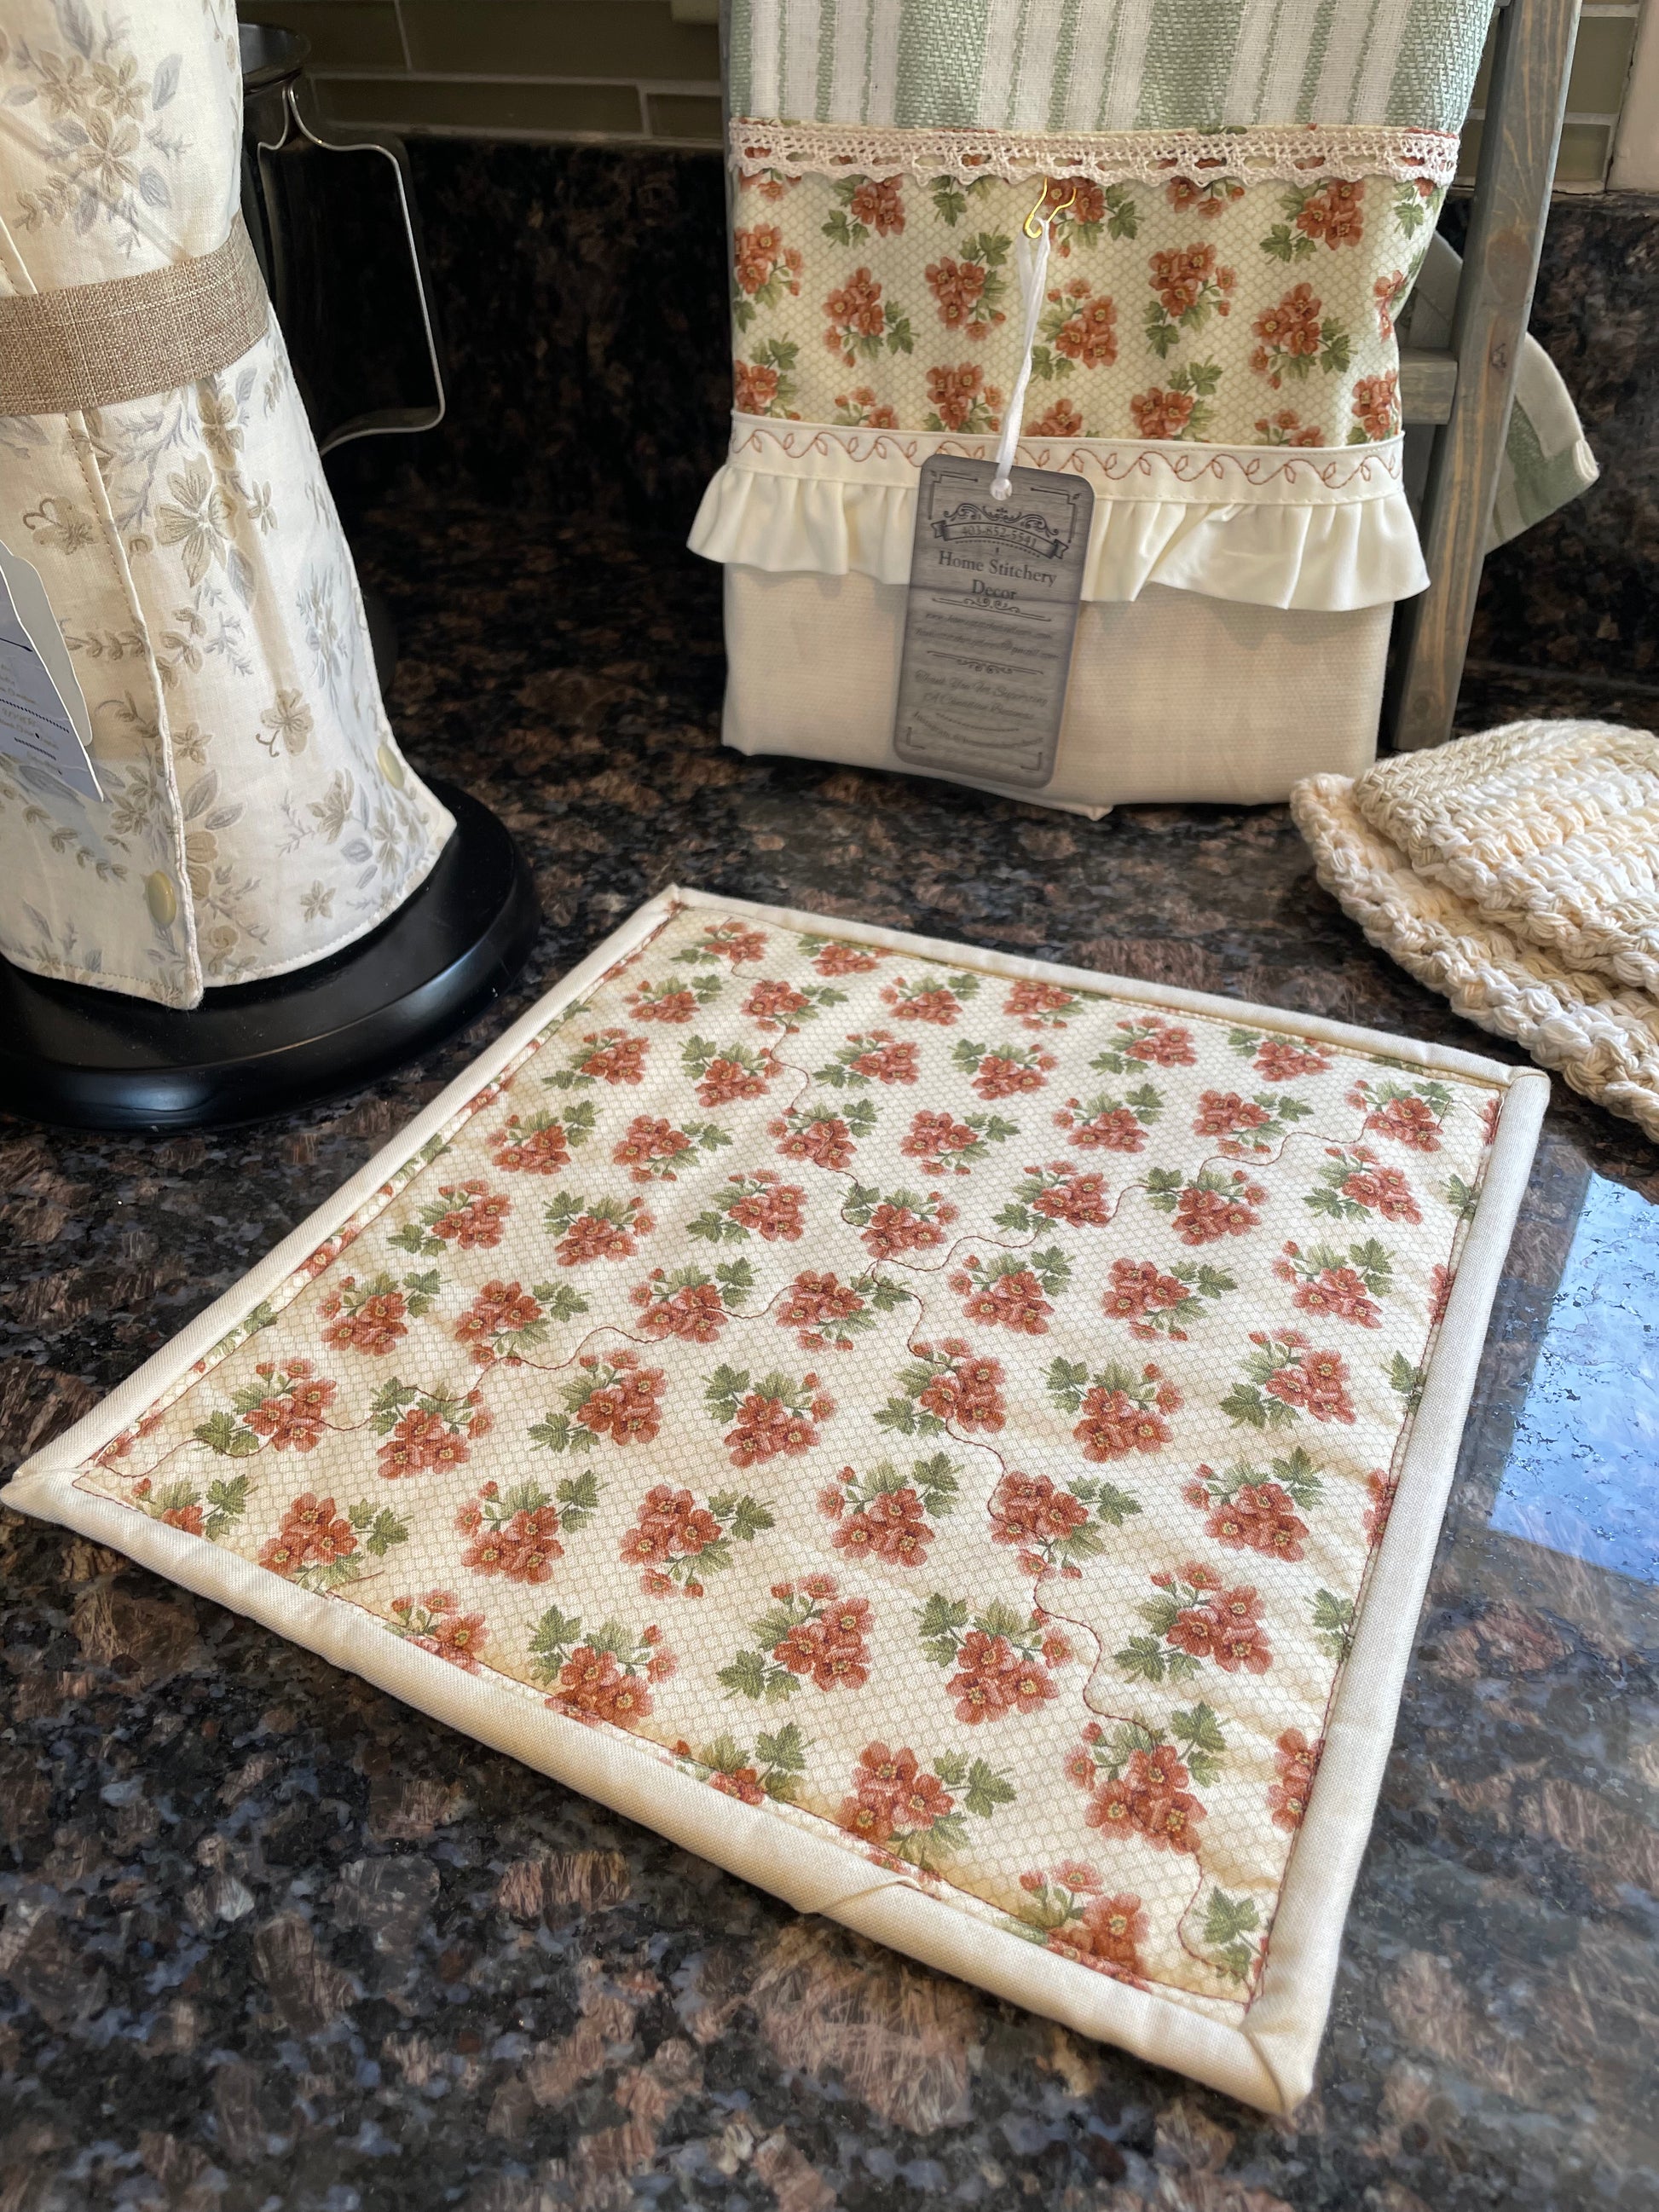 Modern Farmhouse Styled Pot Holder. Part of a mix and match collection of farmhouse kitchen decor. Browse the collections and follow along on the Home Stitchery Decor YouTube Channel